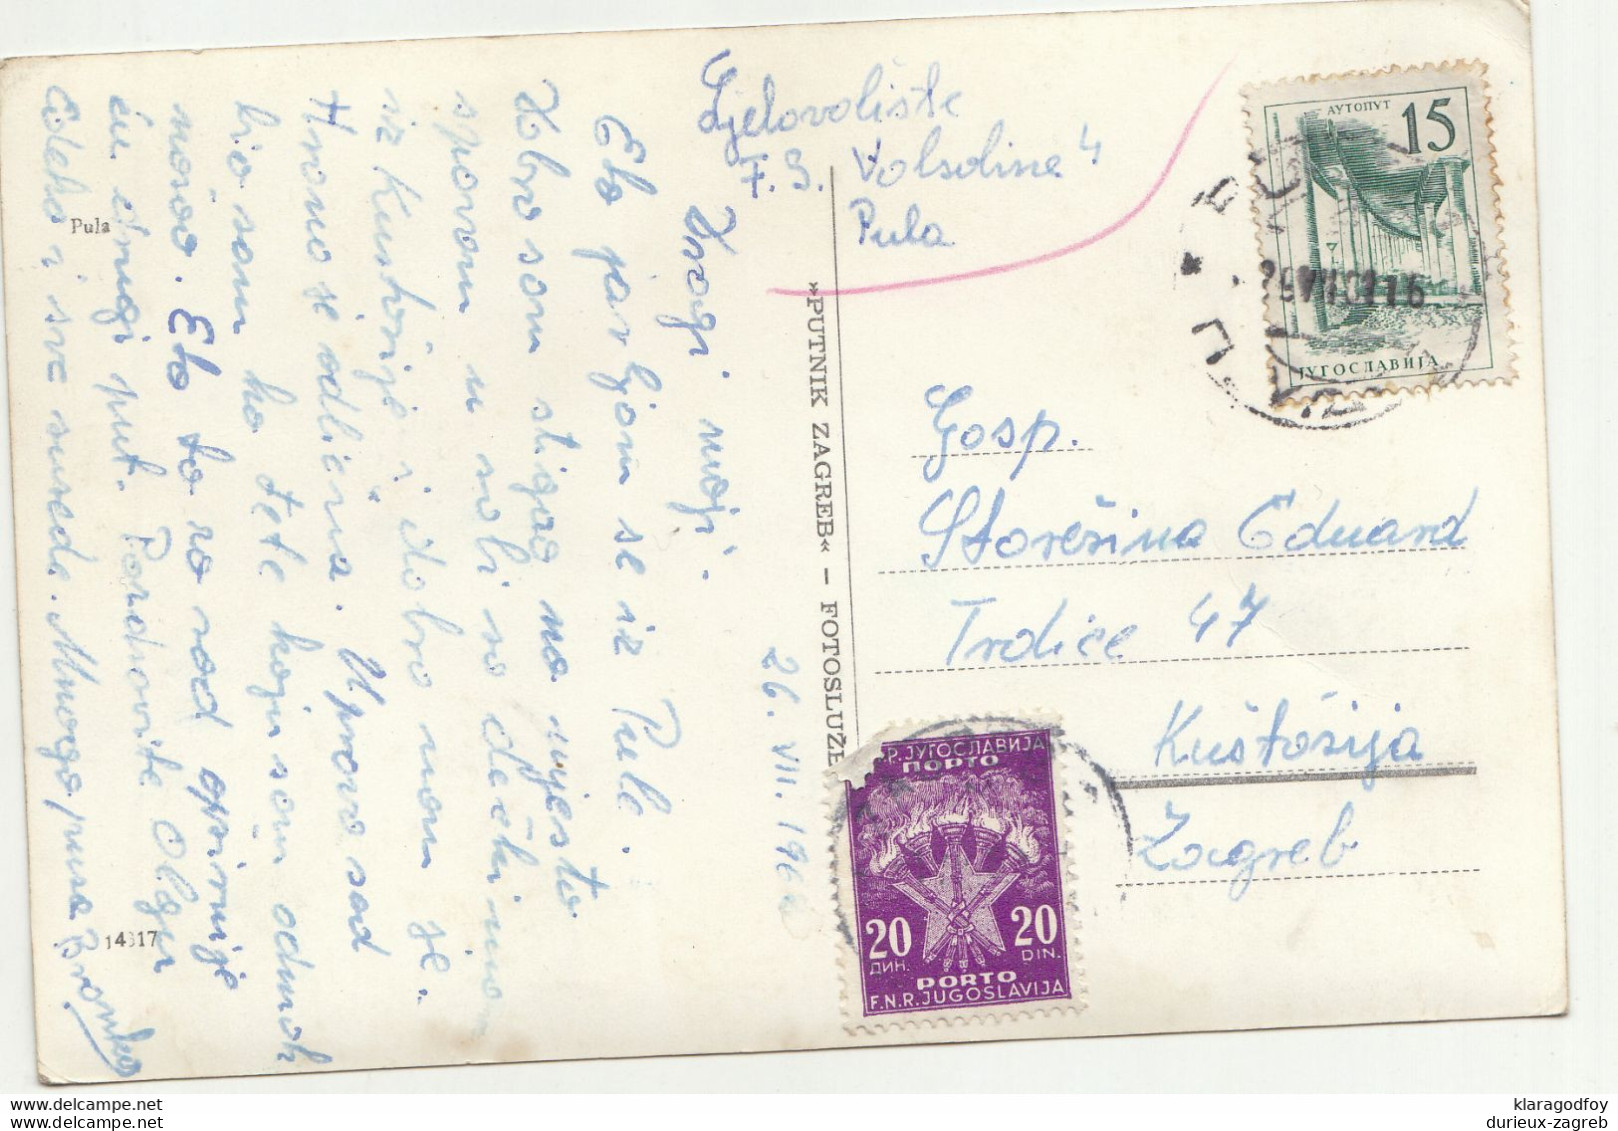 Yugoslavia - Postaged Due - Ported Postcard Pula Posted 196? B210310 - Postage Due